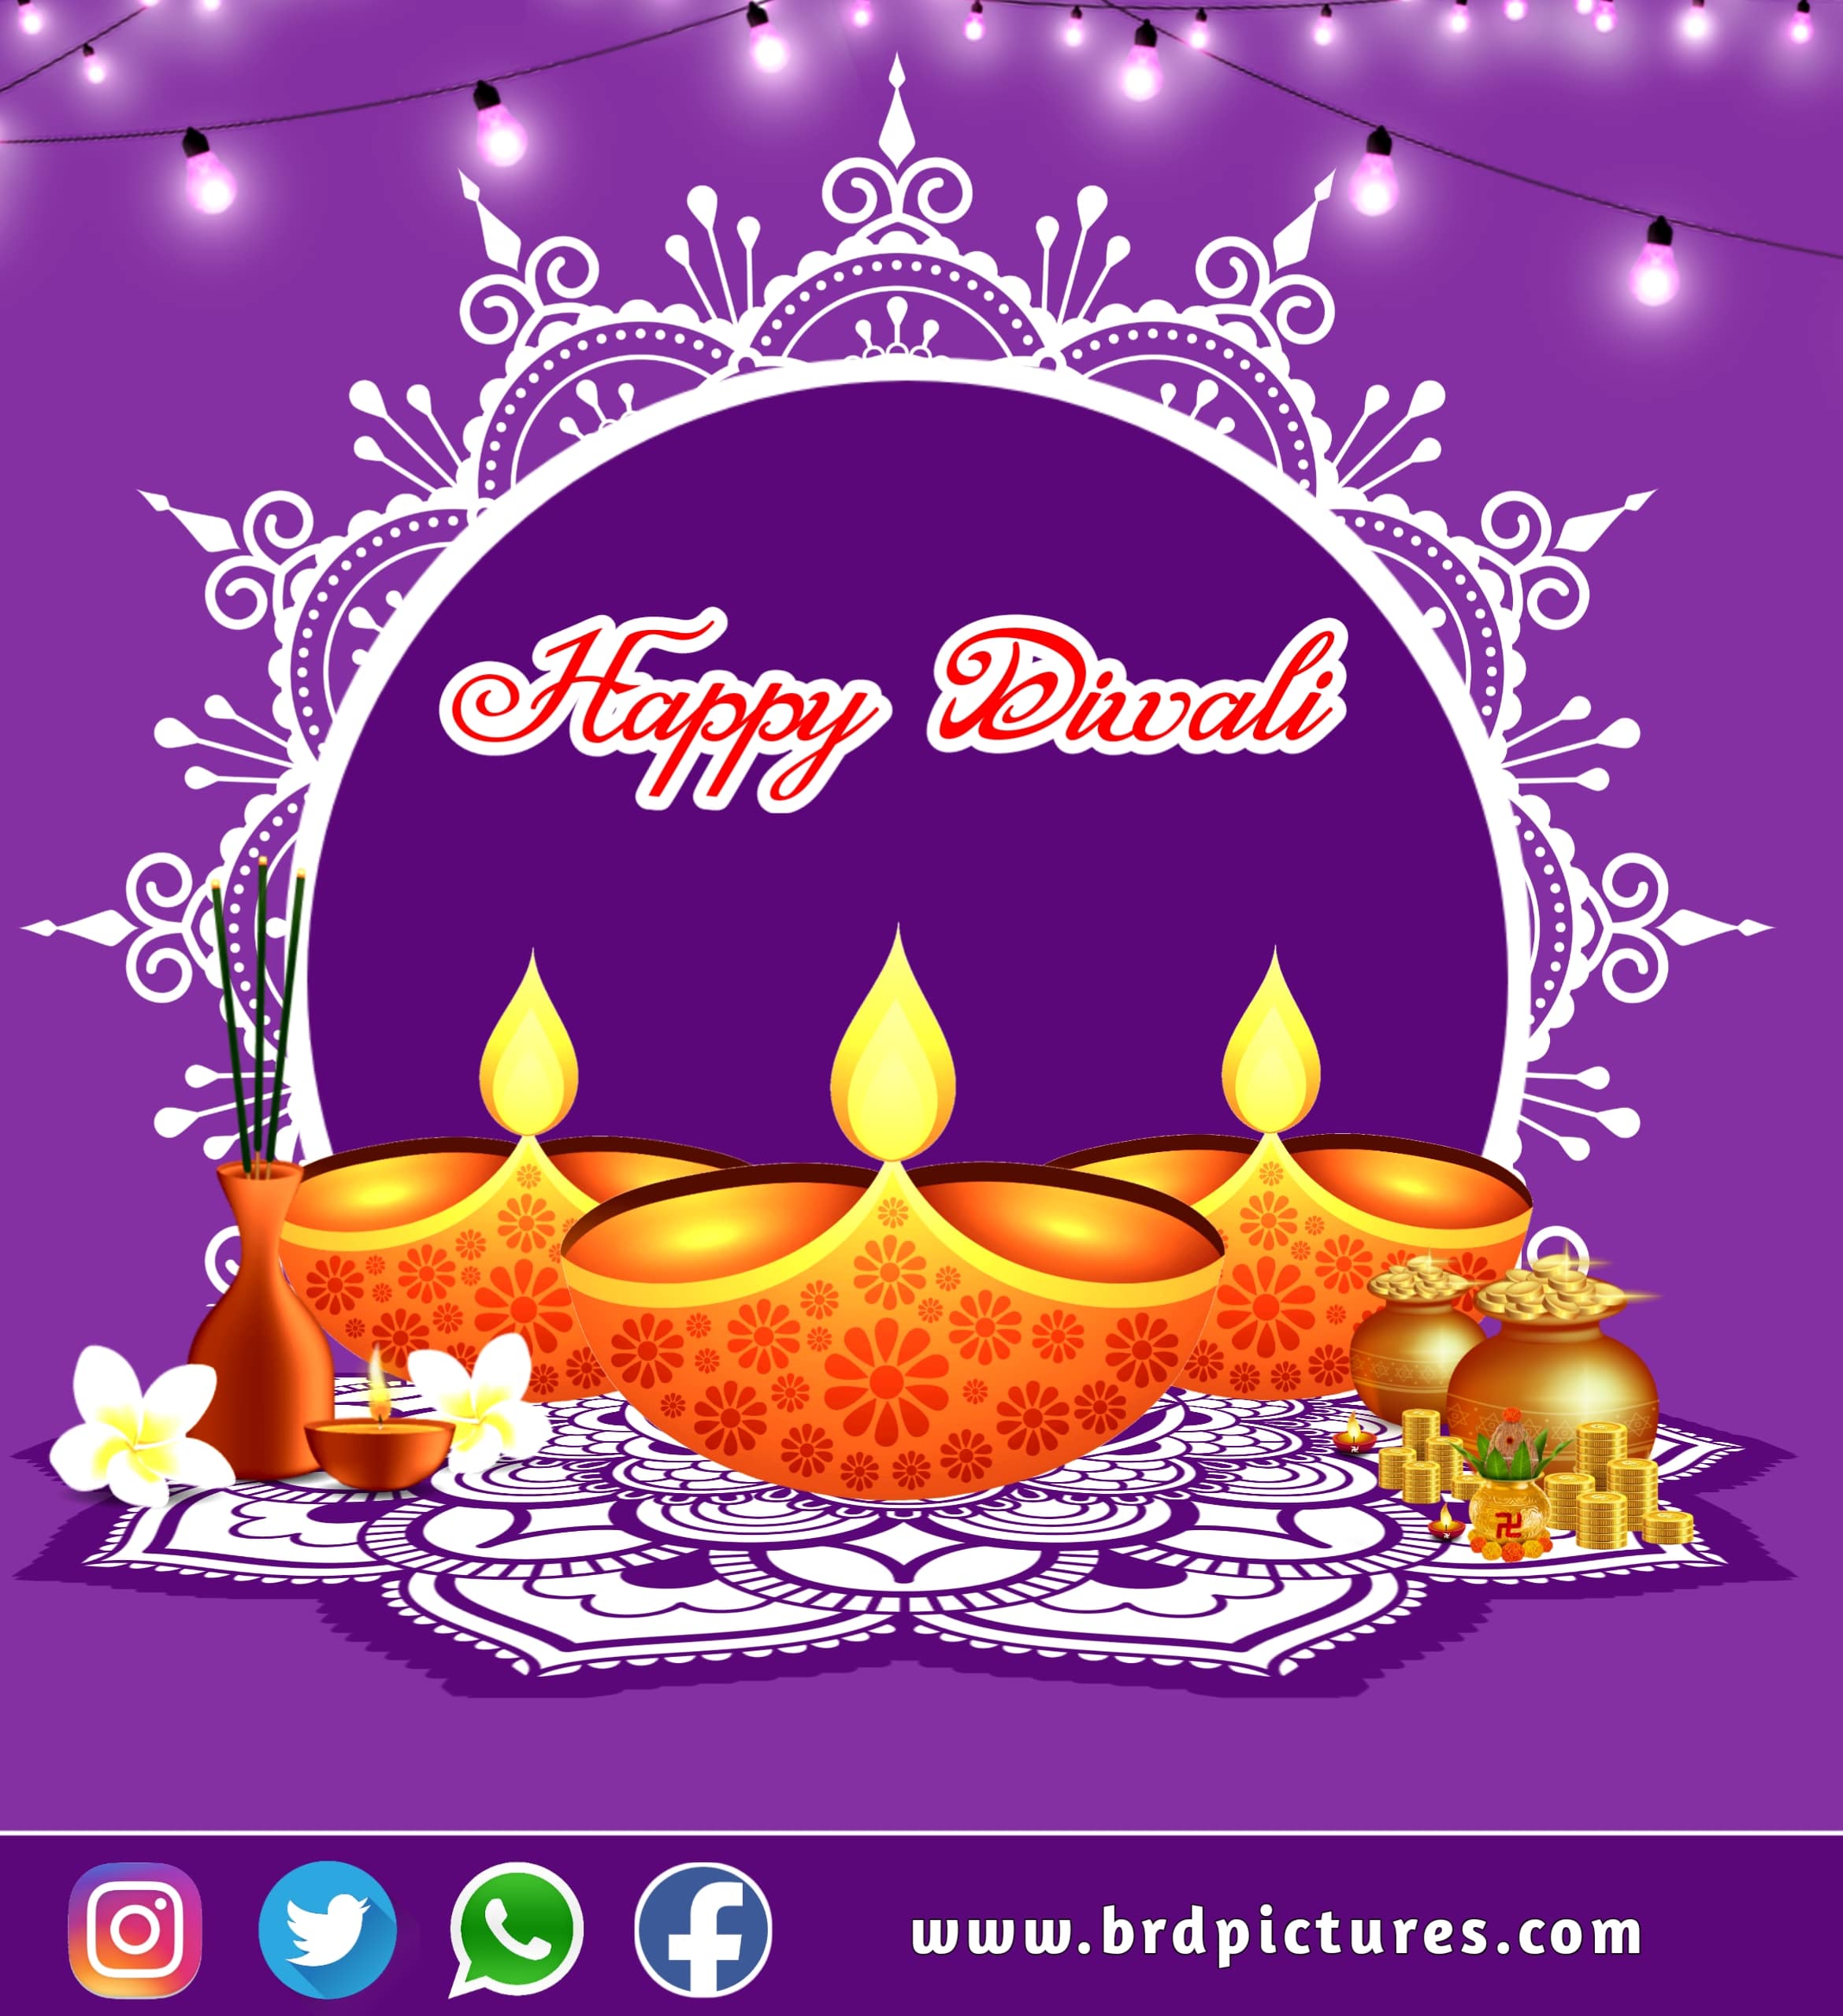 Happy Diwali Wishes Poster Download Free By BRD Pictures 